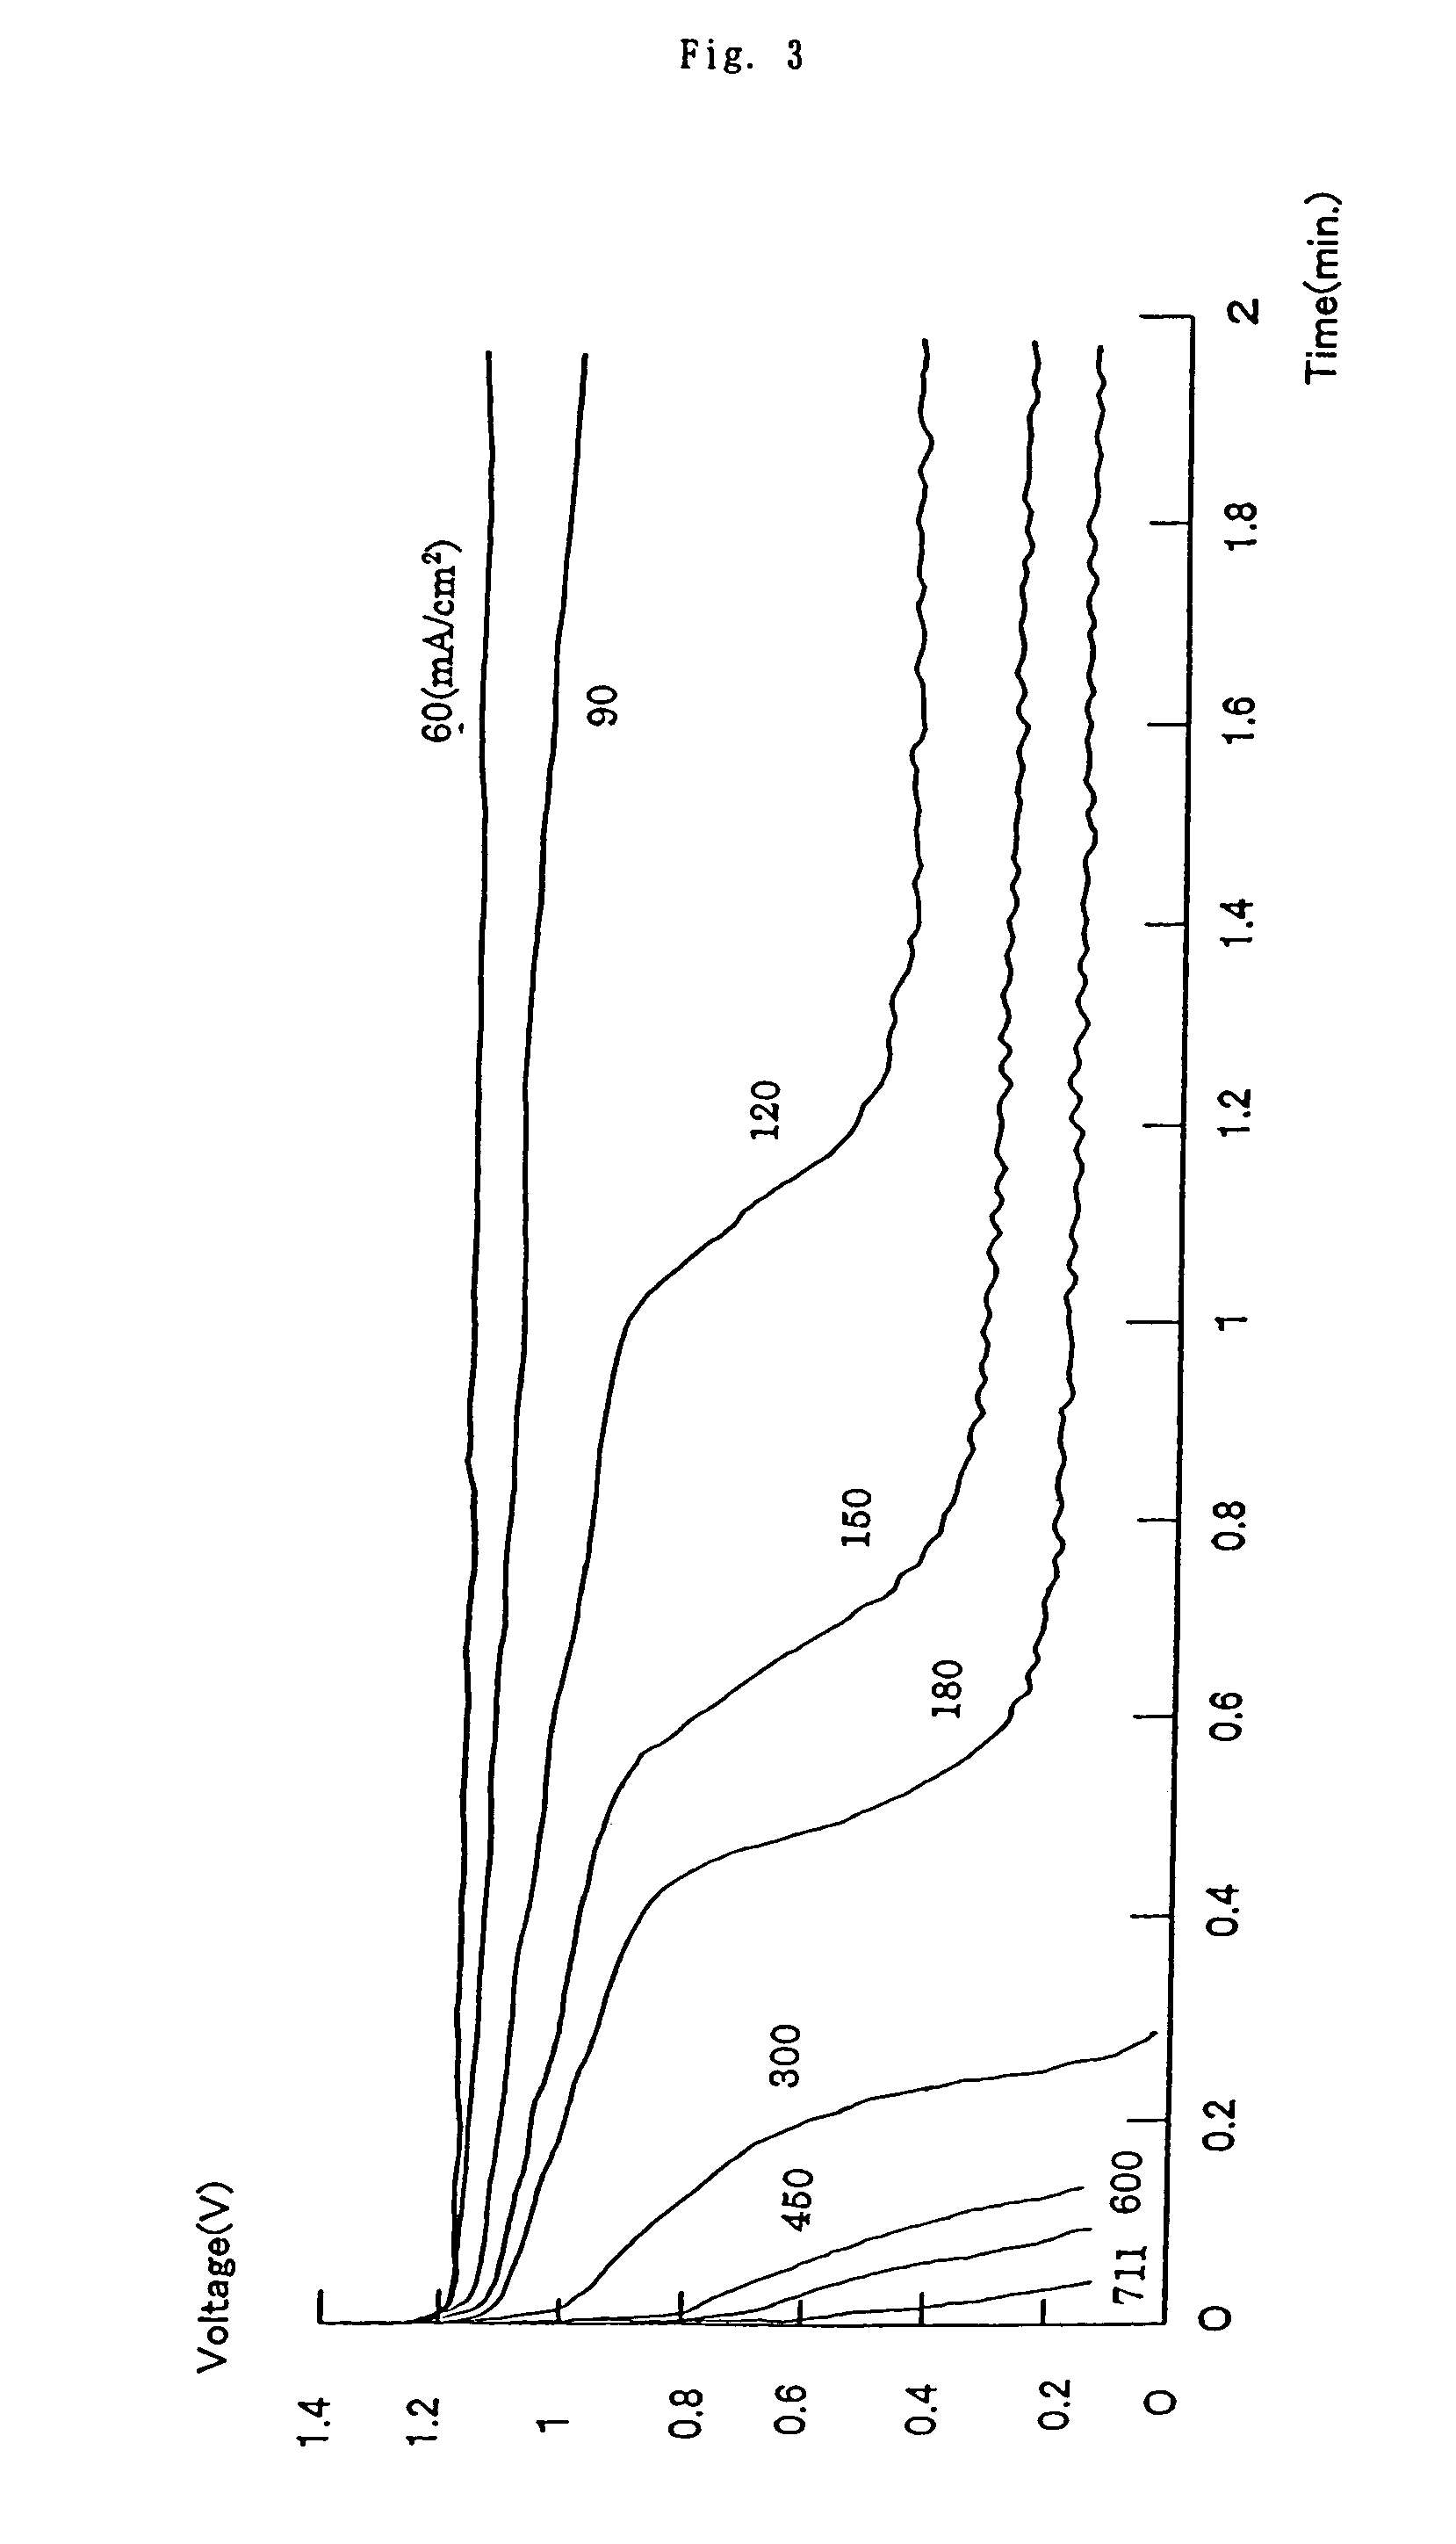 Method of operating a secondary battery system having first and second tanks for reserving electrolytes